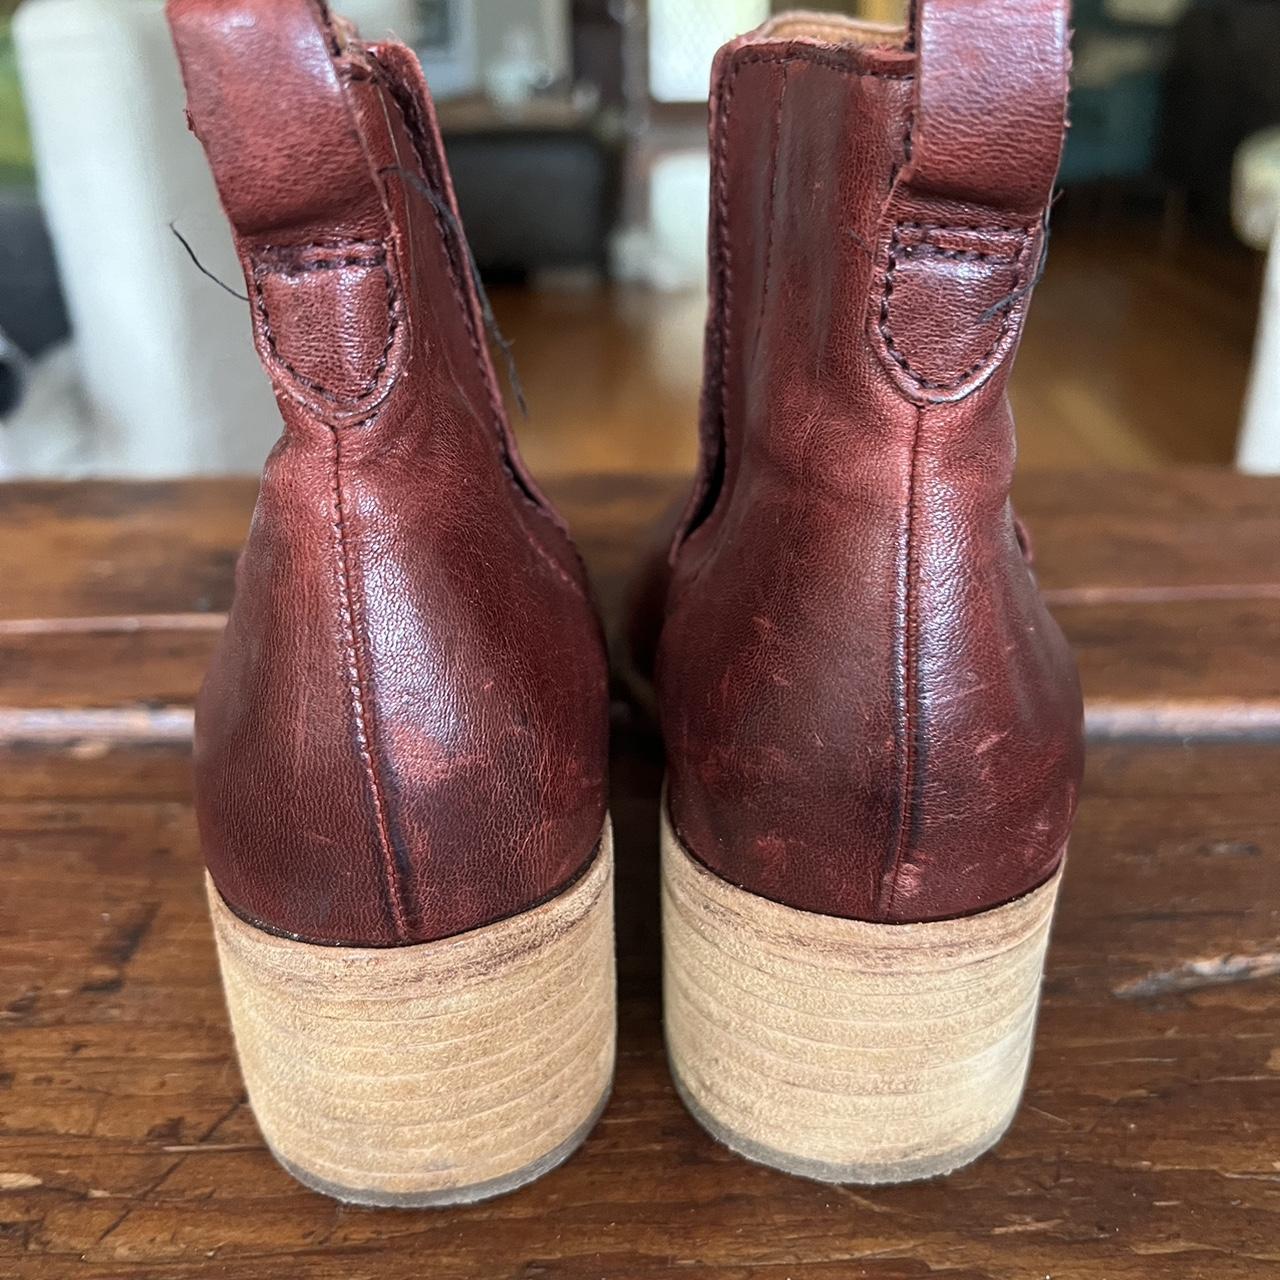 Korks Women's Burgundy and Brown Boots (7)